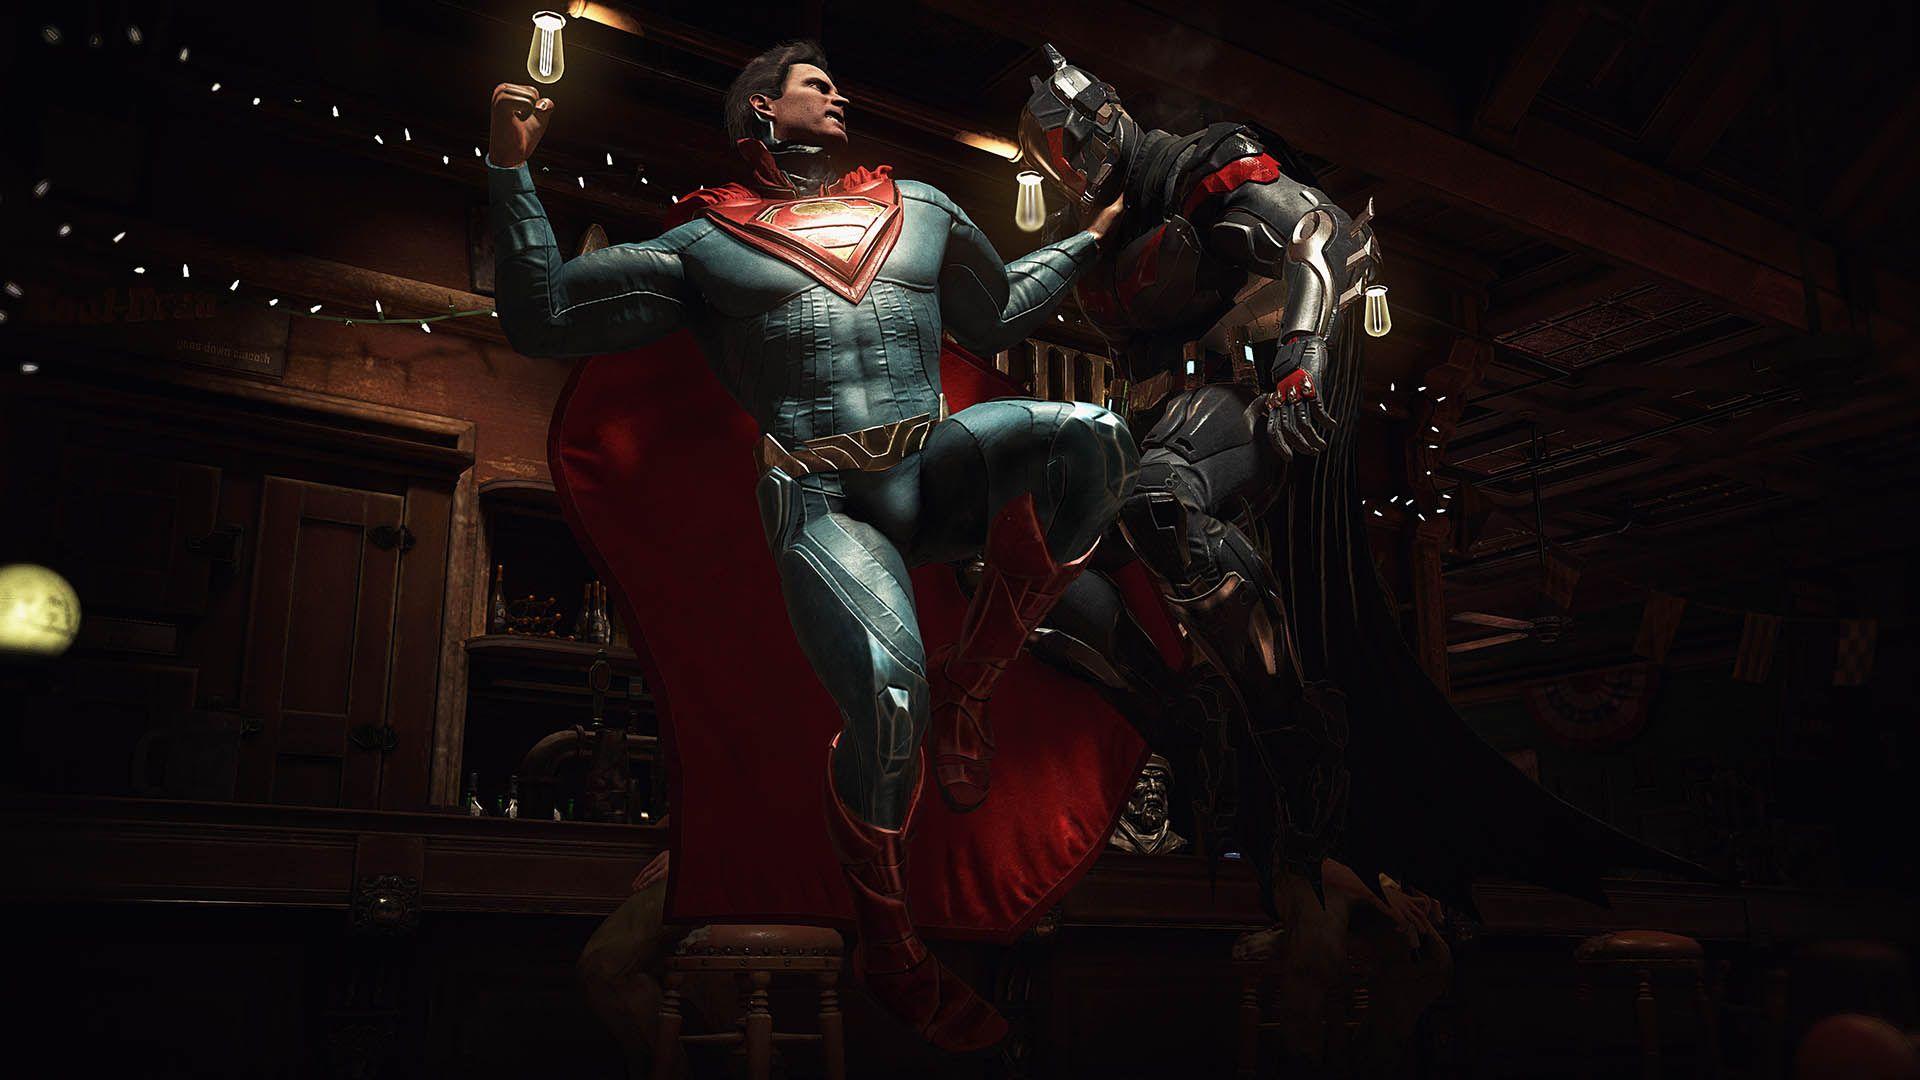 Injustice 2 Move List Guide: Command inputs for all heroes on PS4